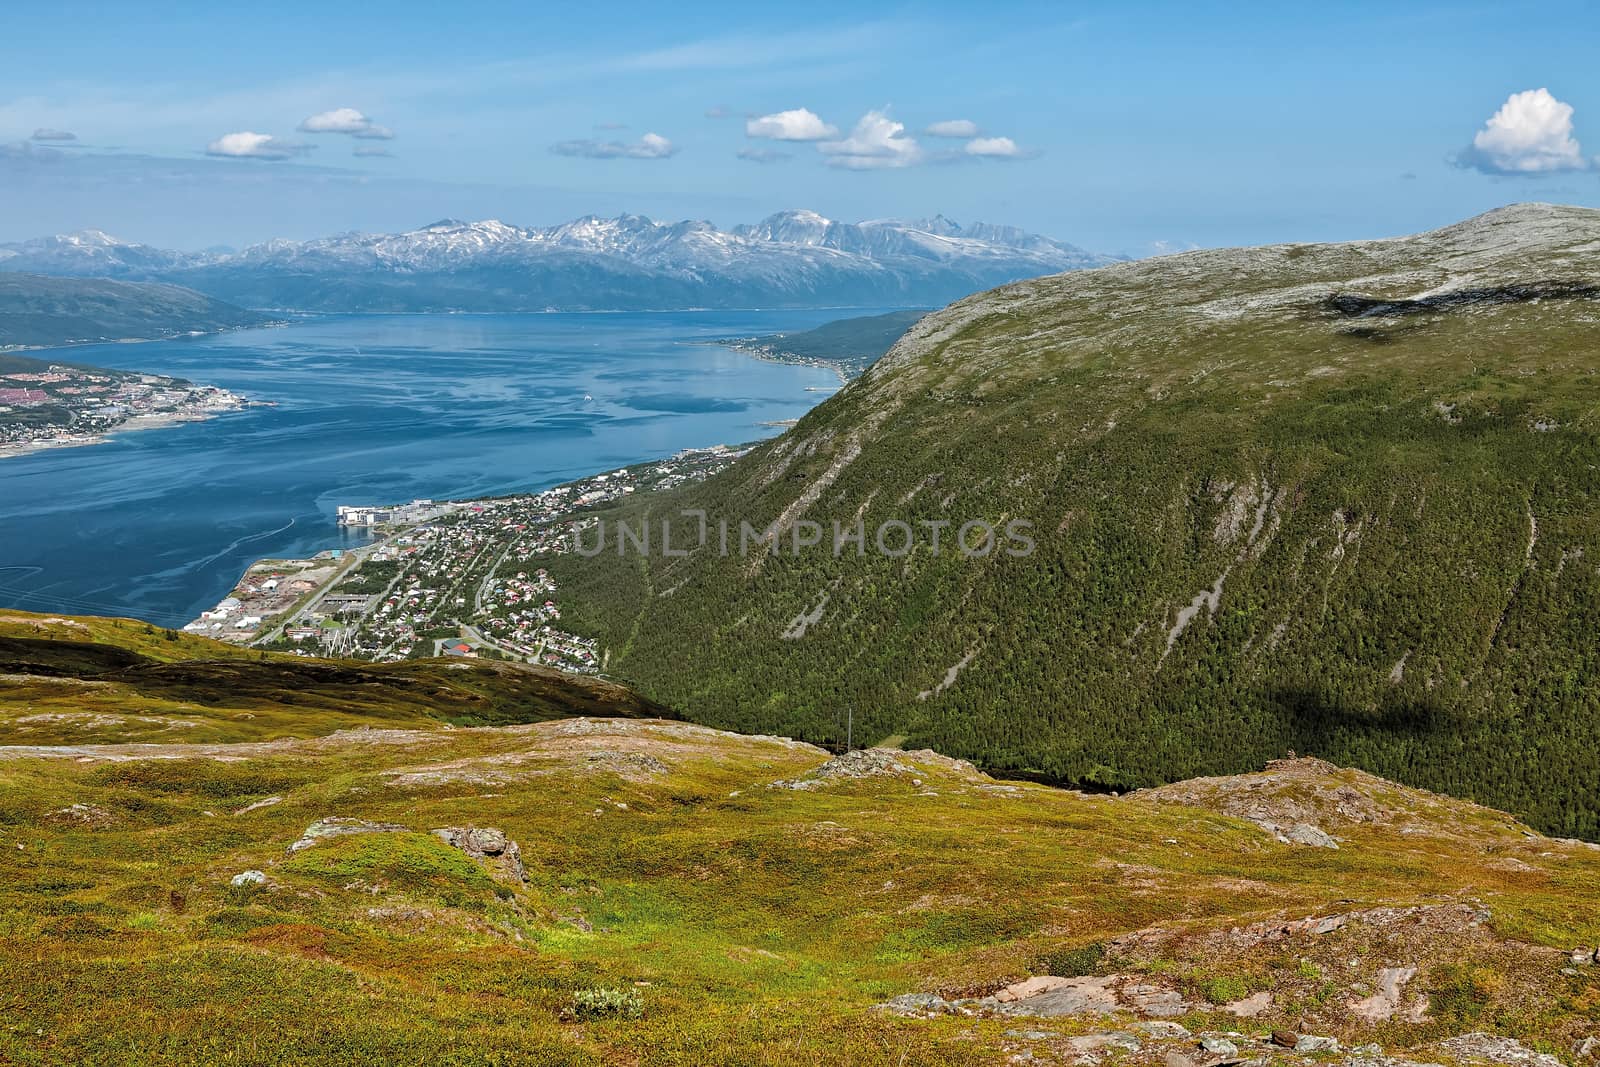 Mountains view and fjord in Tromso, Norway by LuigiMorbidelli